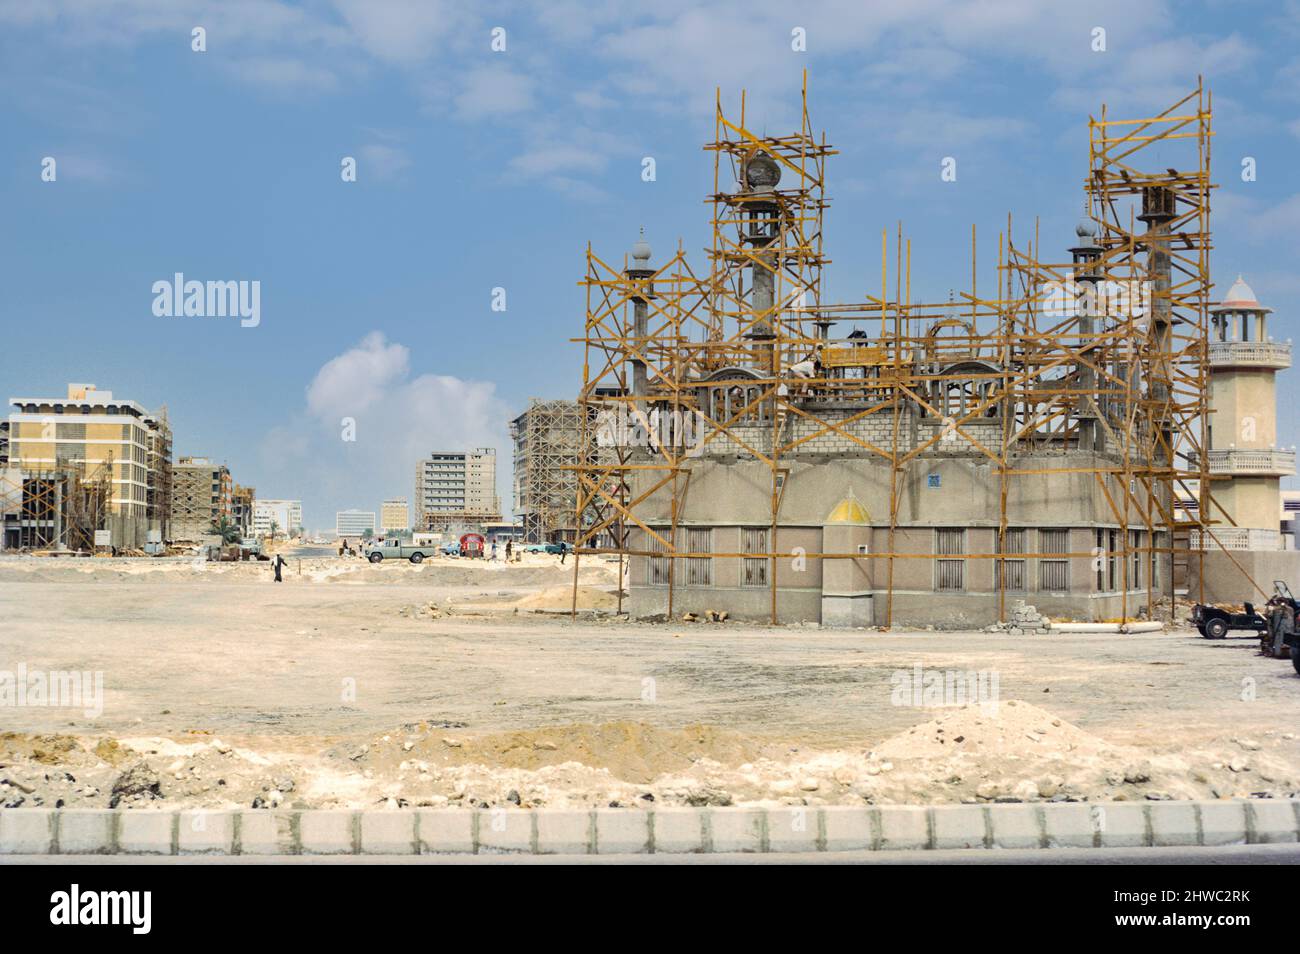 Abu Dhabi, UAE. Neighborhood Mosque and Other Construction as Part of Abu Dhabi's Modern Urban Development. Photographed March 1972. Stock Photo